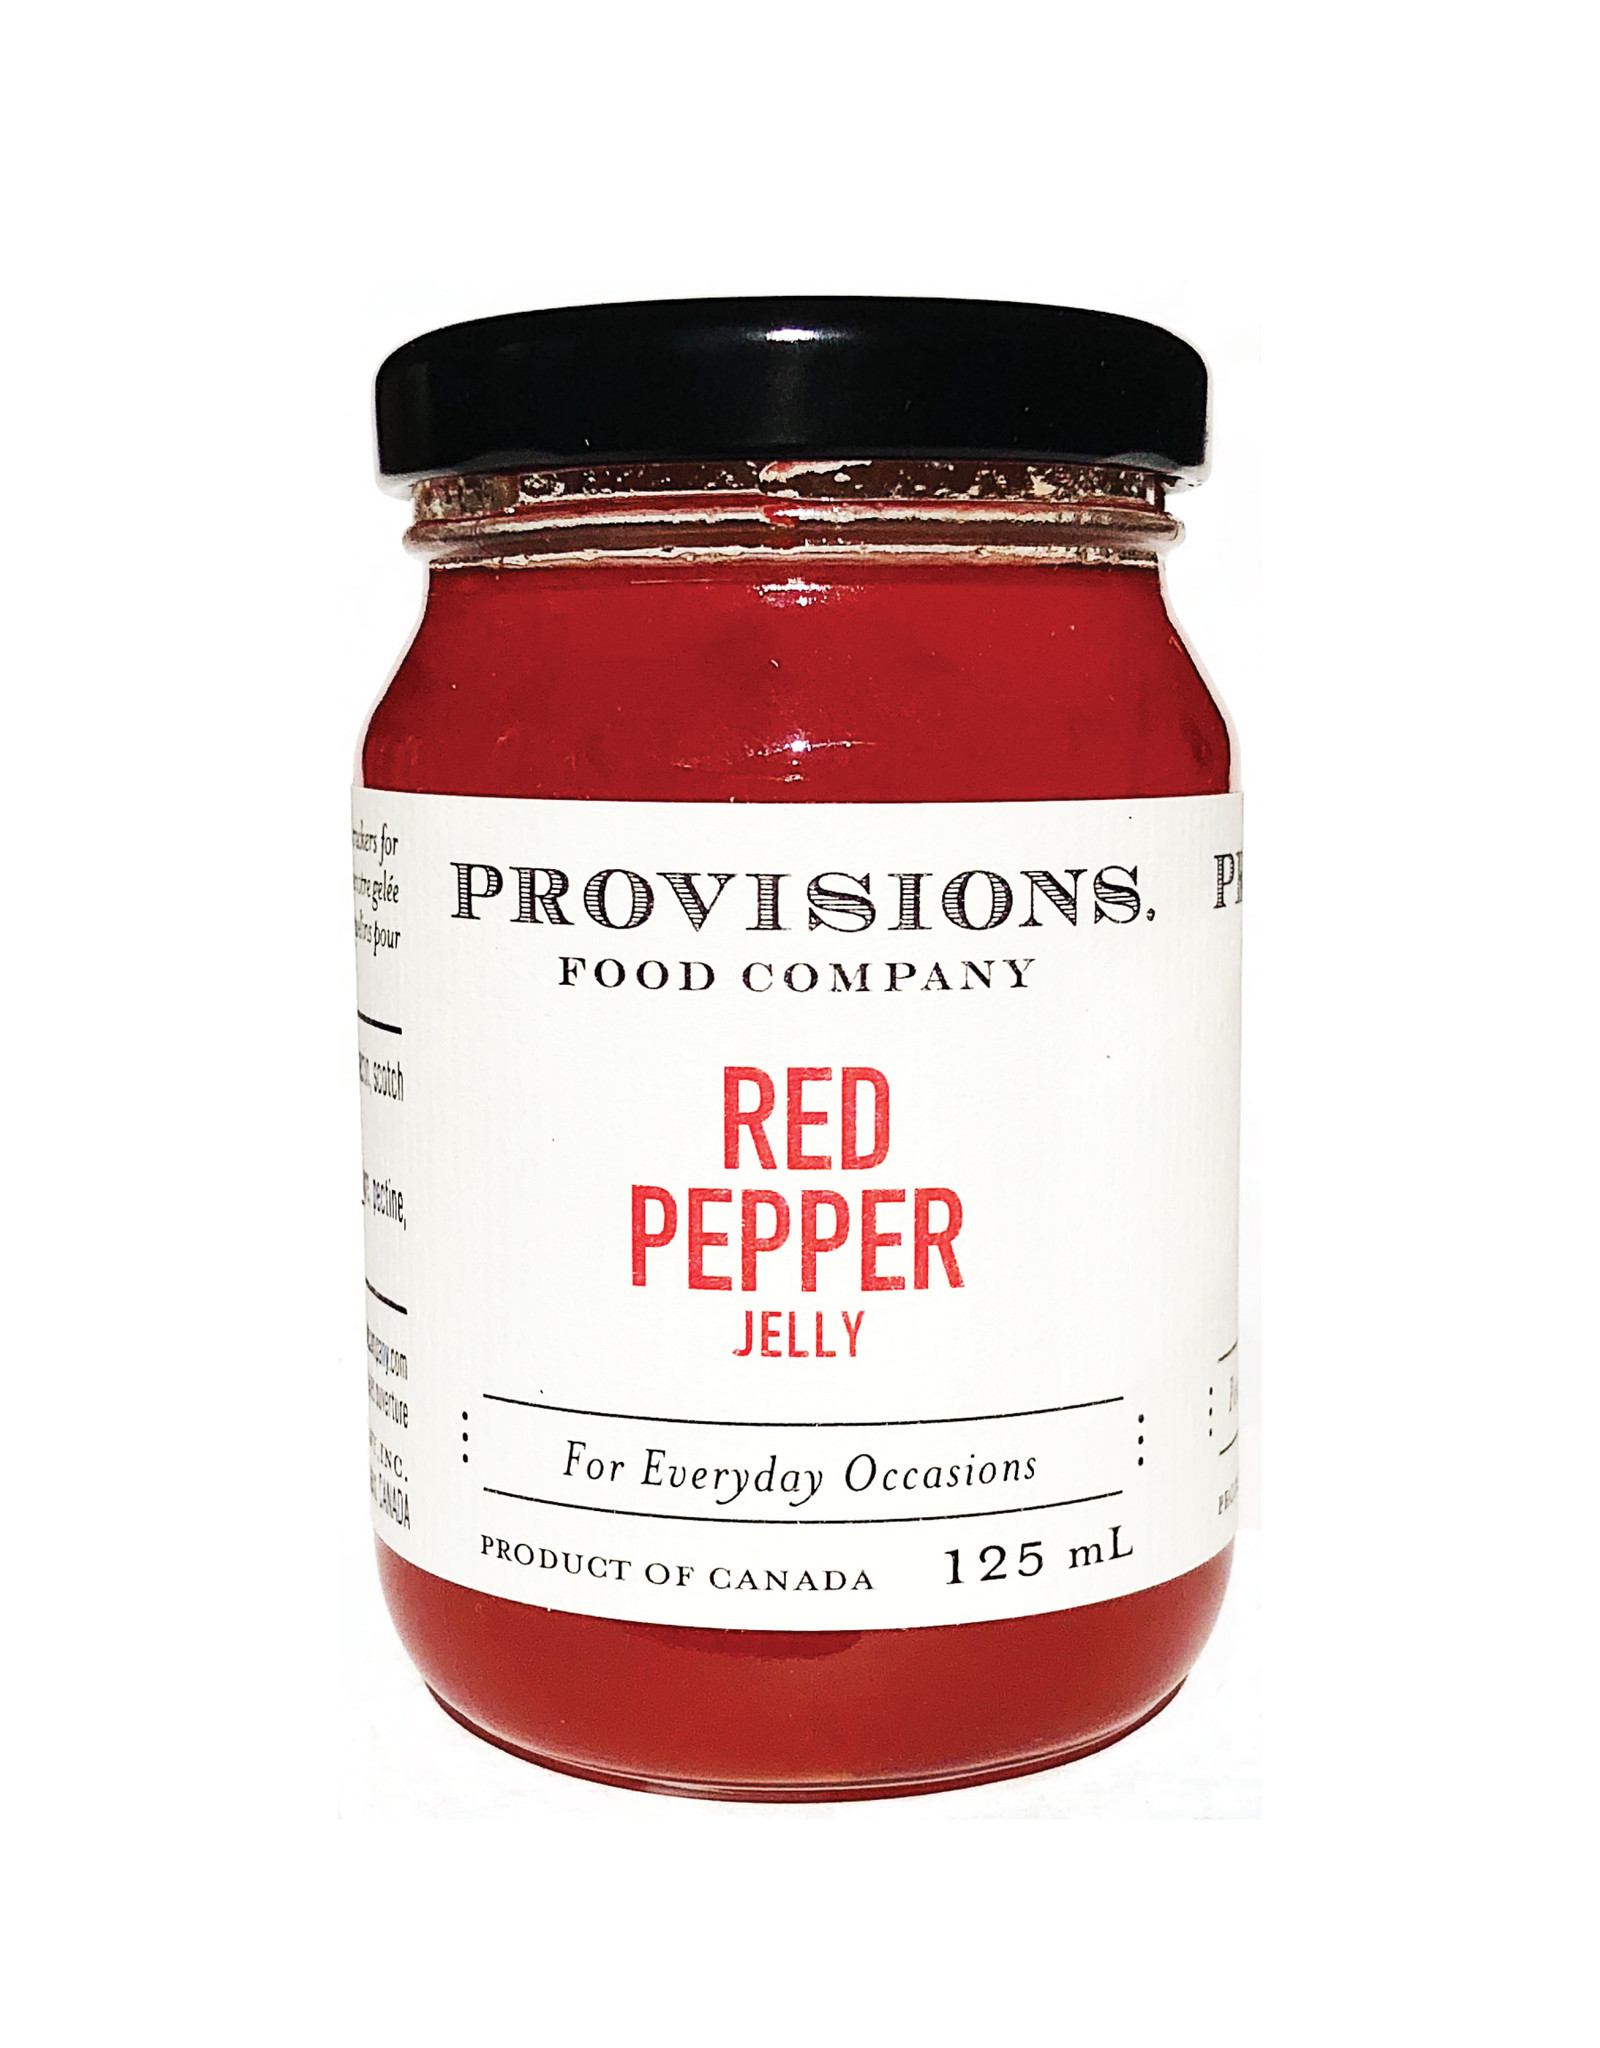 Provisions Food Company - Red Pepper Jelly